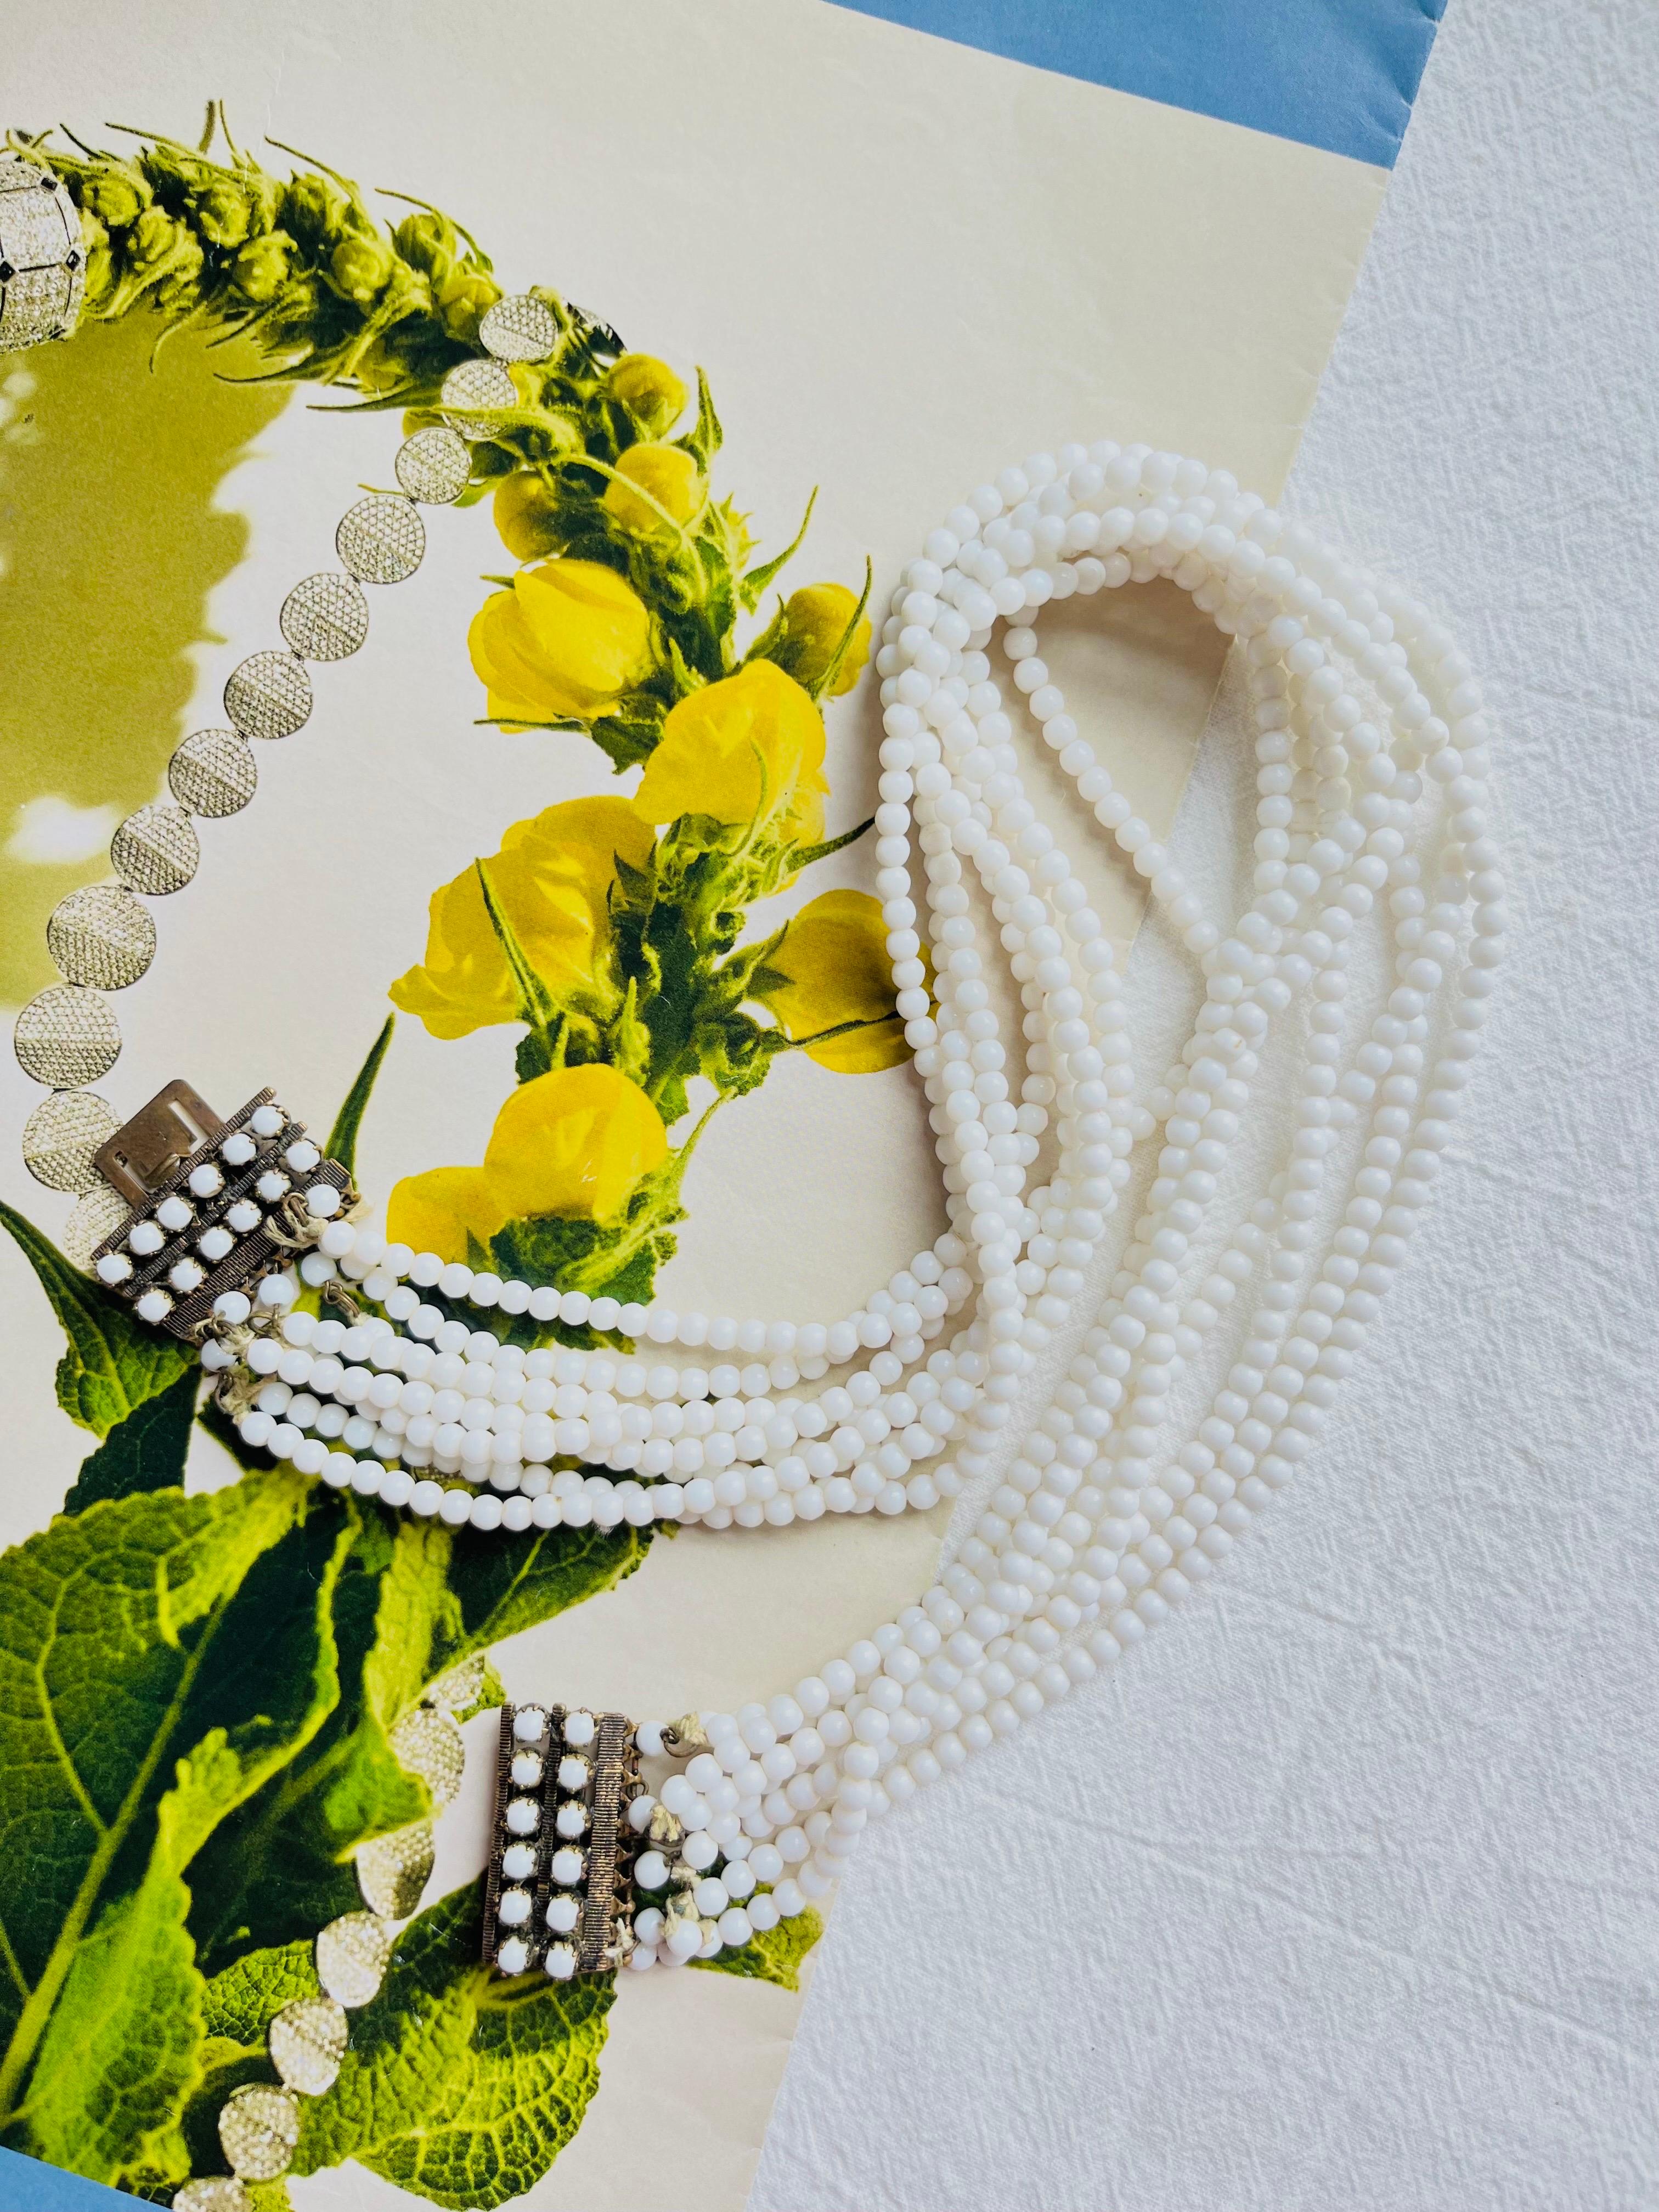 Christian Dior Vintage 1962 Eight 8 Strands Milk White Glass Bead Layer Necklace In Good Condition For Sale In Wokingham, England